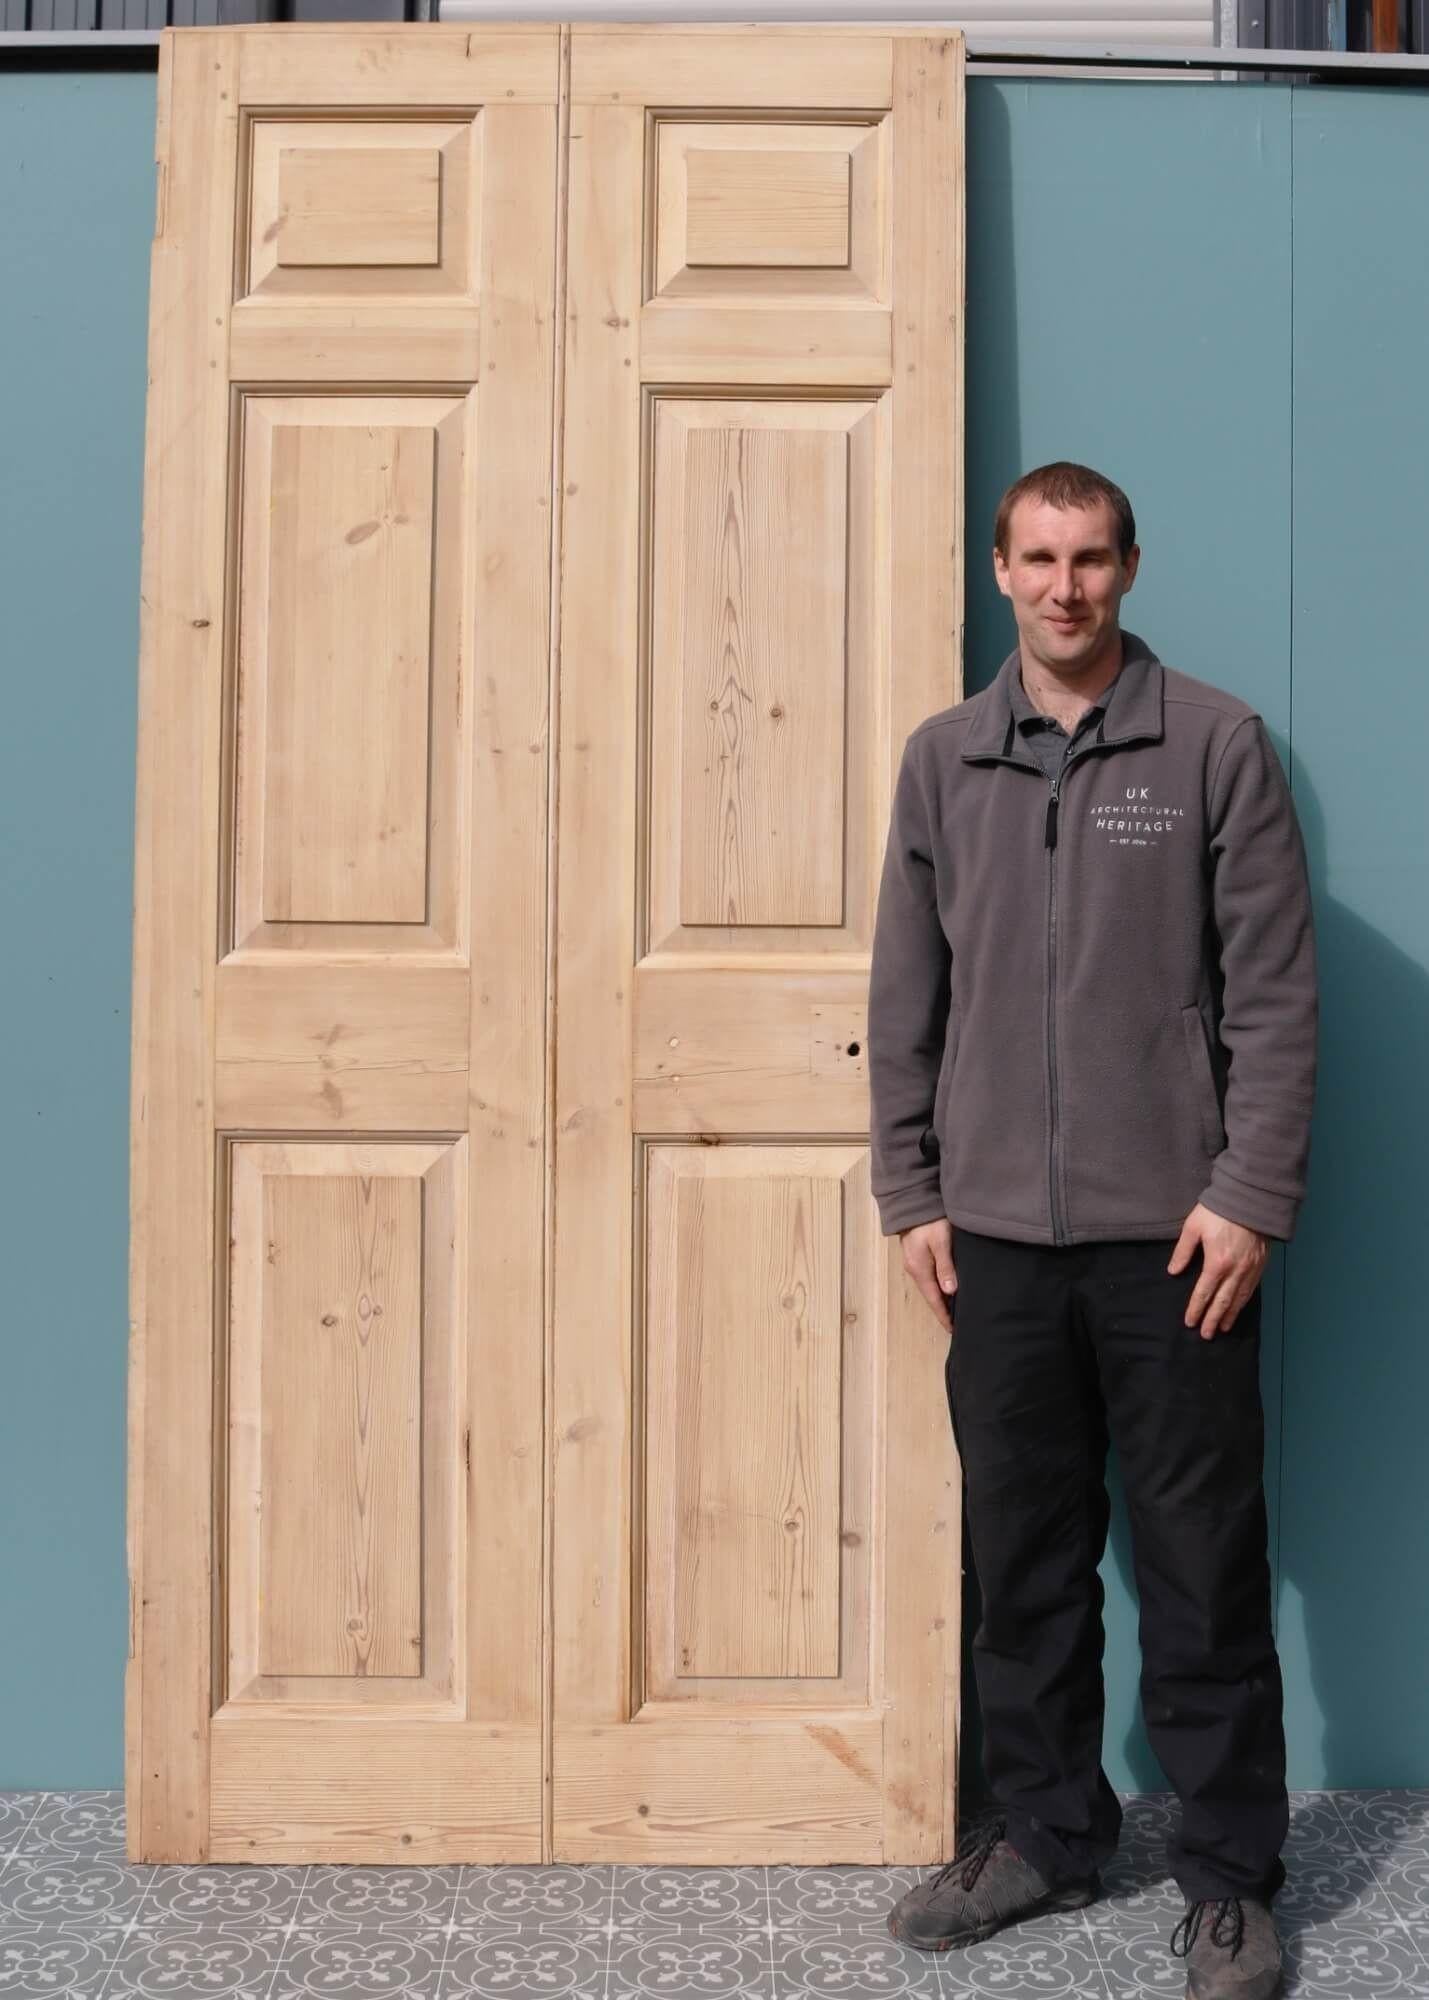 This tall reclaimed Georgian internal door has stood the test of time for more than 200 years. Dating from the early 19th century, it is made from pine with a stripped finish that’s ready for painting or staining in a desired colour. Detailed with